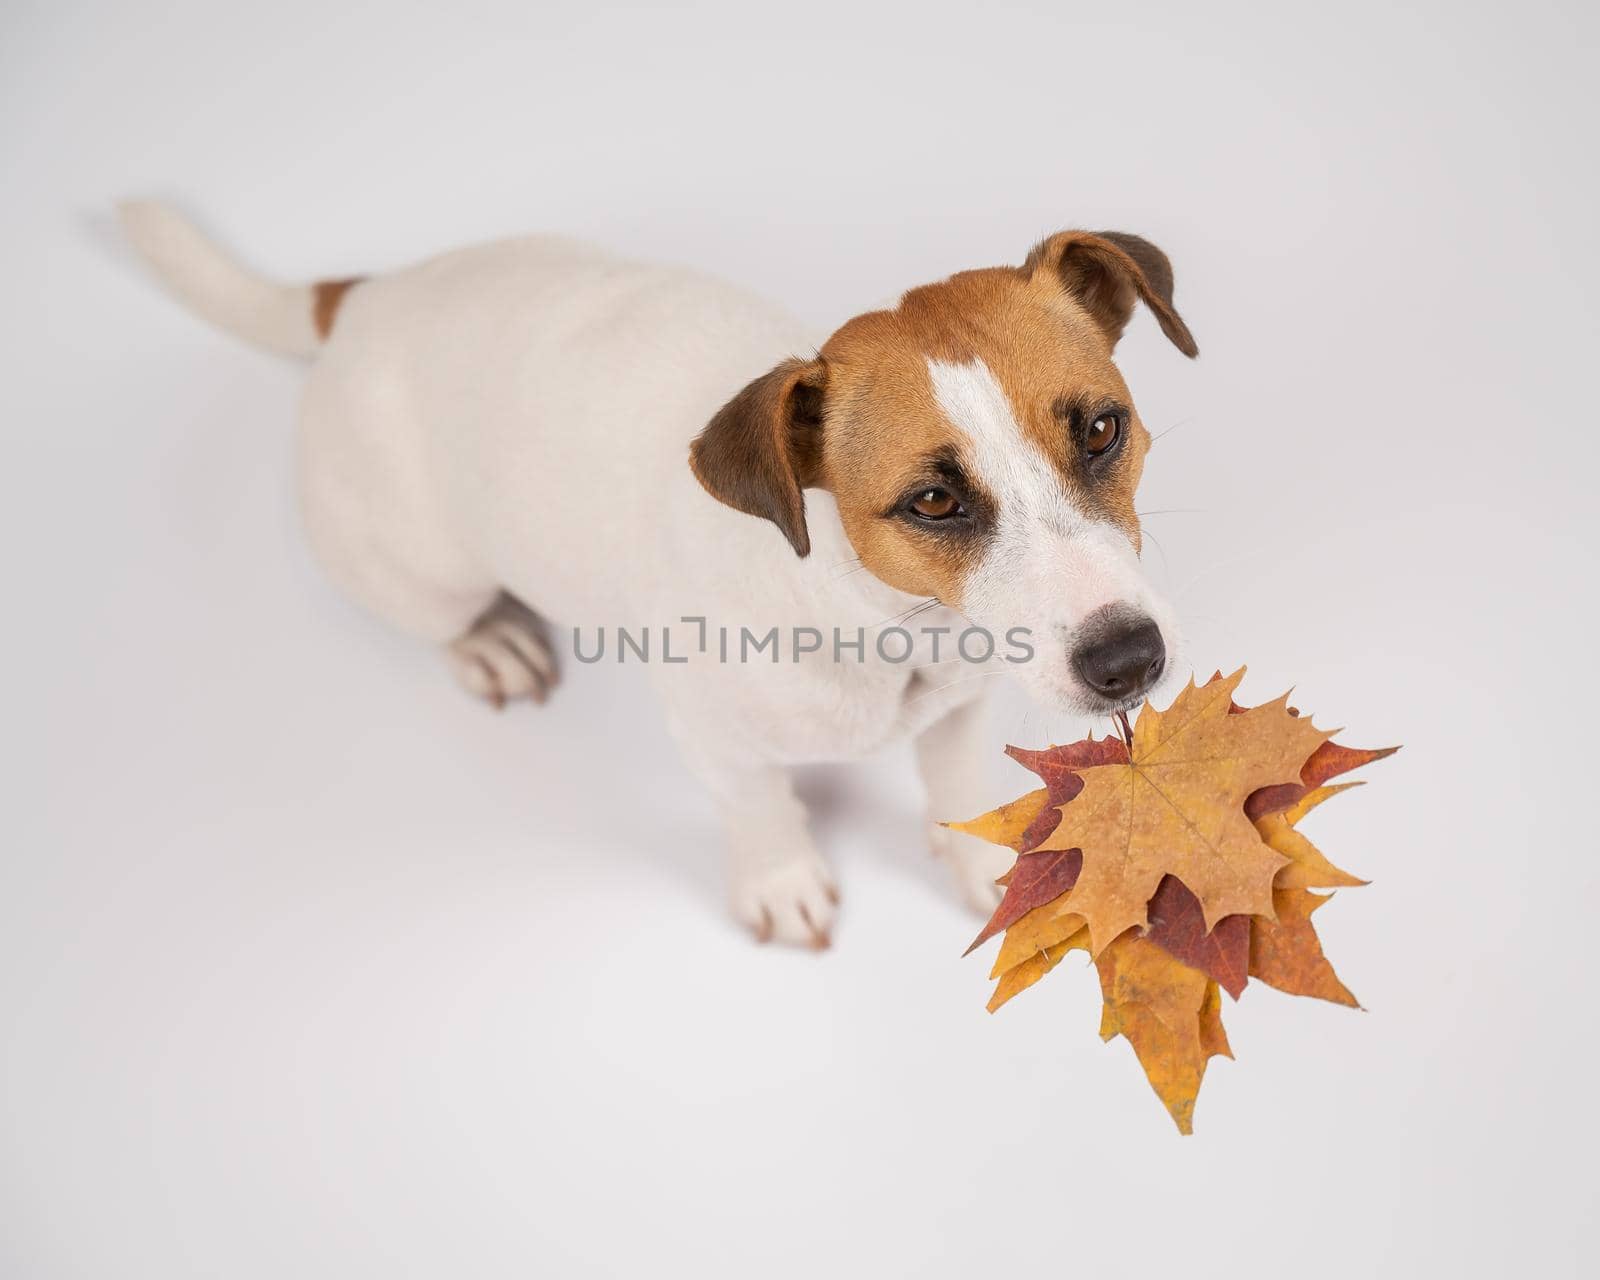 The dog is holding a bunch of maple leaves on a white background